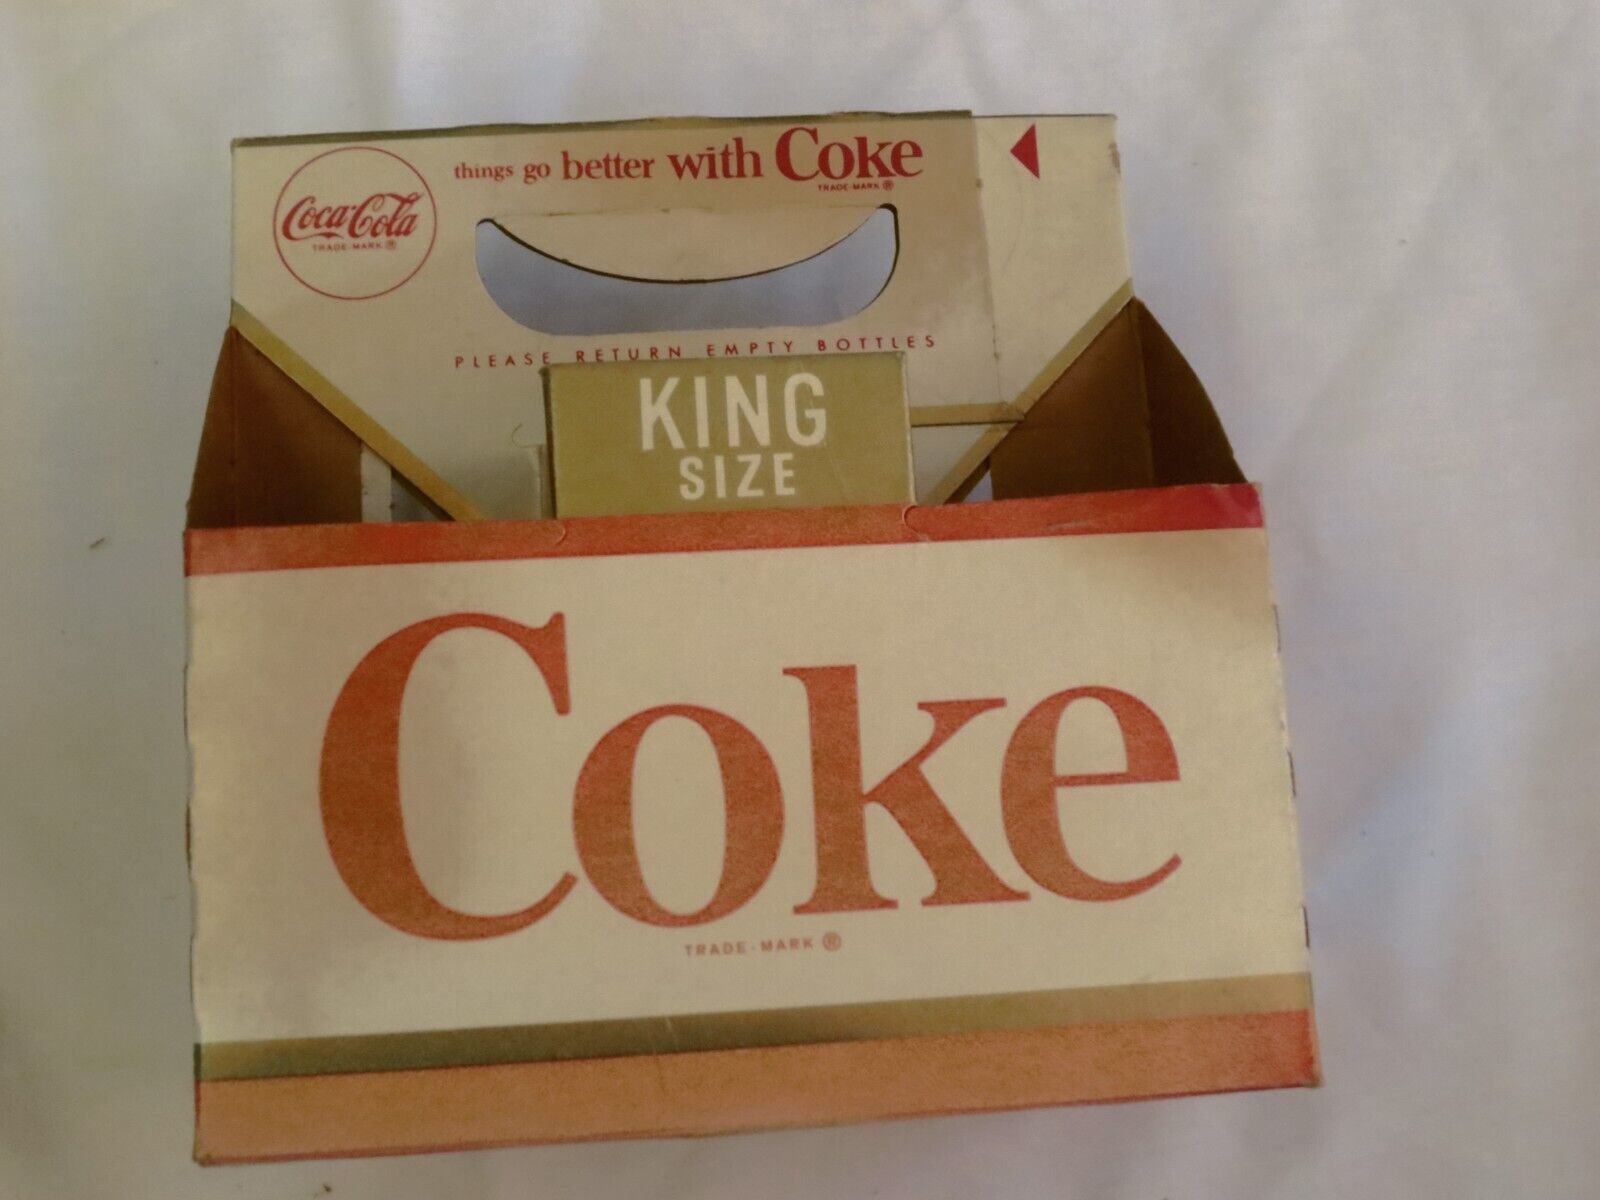 Coke King Size Things Go better with Coke 10oz Carrier Carton used - $4.46